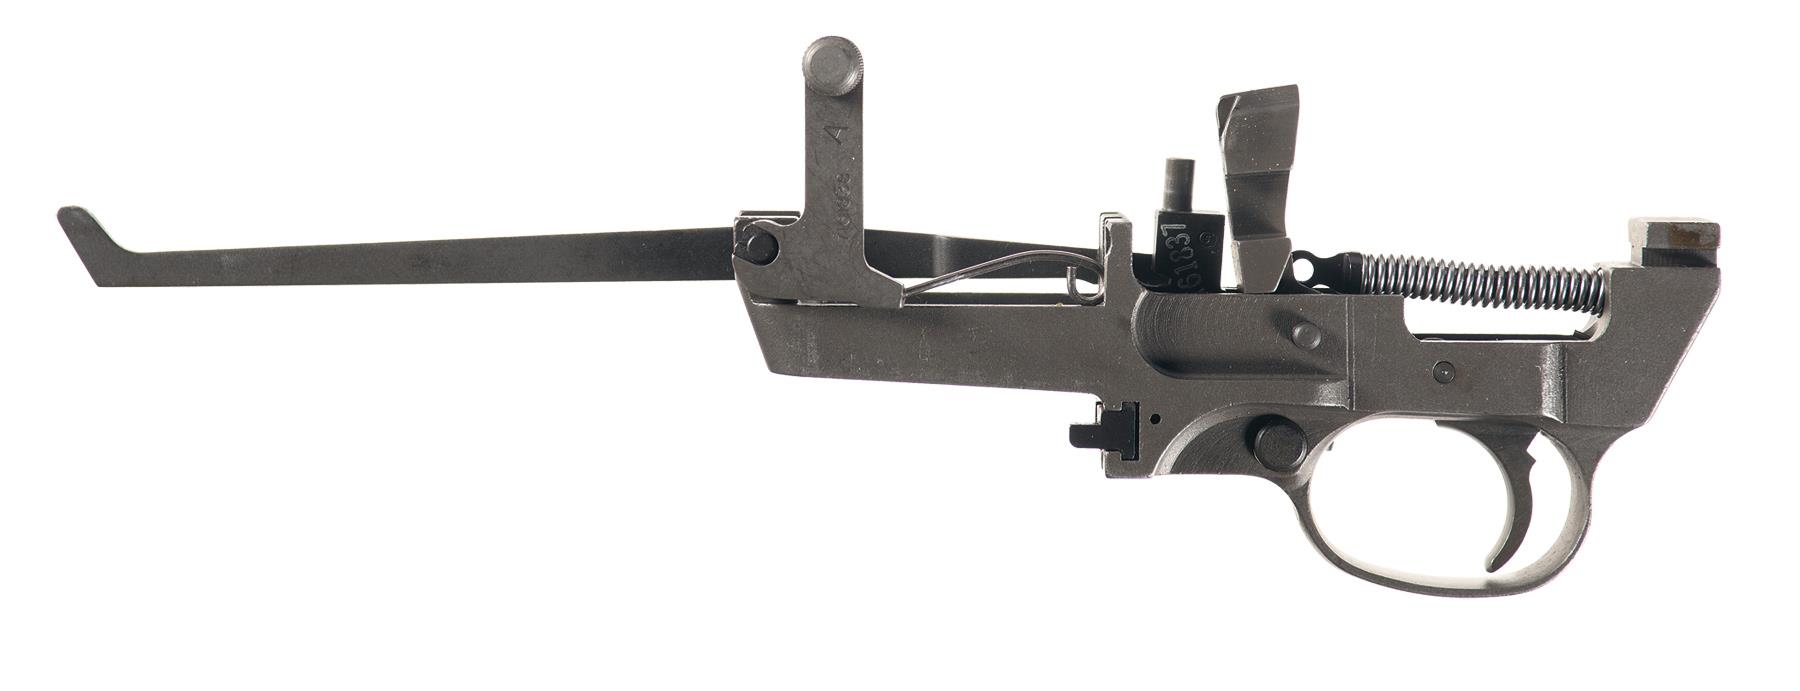 Fully Transferrable M2 Automatic Carbine Trigger Group.